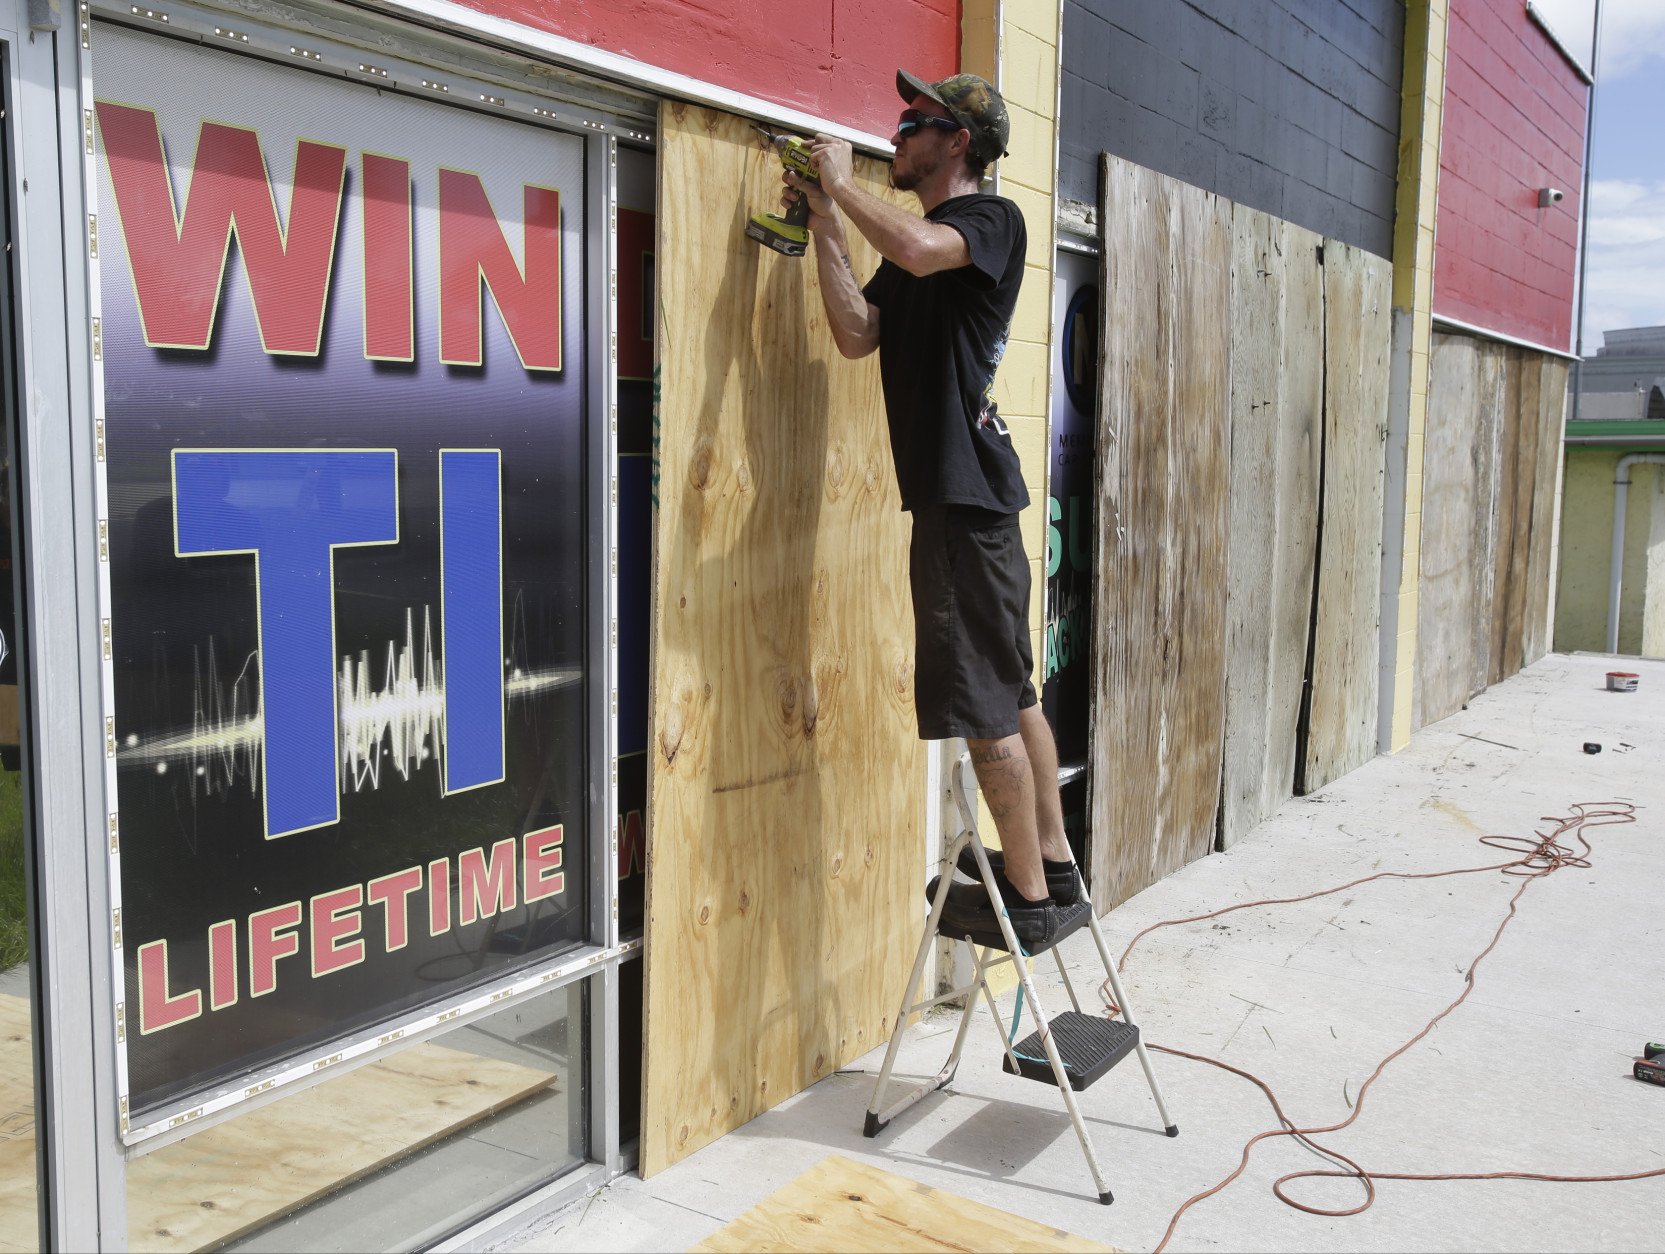 Chris Ramsey installs plywood panels over windows at a auto stereo and window tint shop in preparation for Hurricane Matthew, Wednesday, Oct. 5, 2016, in Cocoa Beach, Fla. (AP Photo/John Raoux)